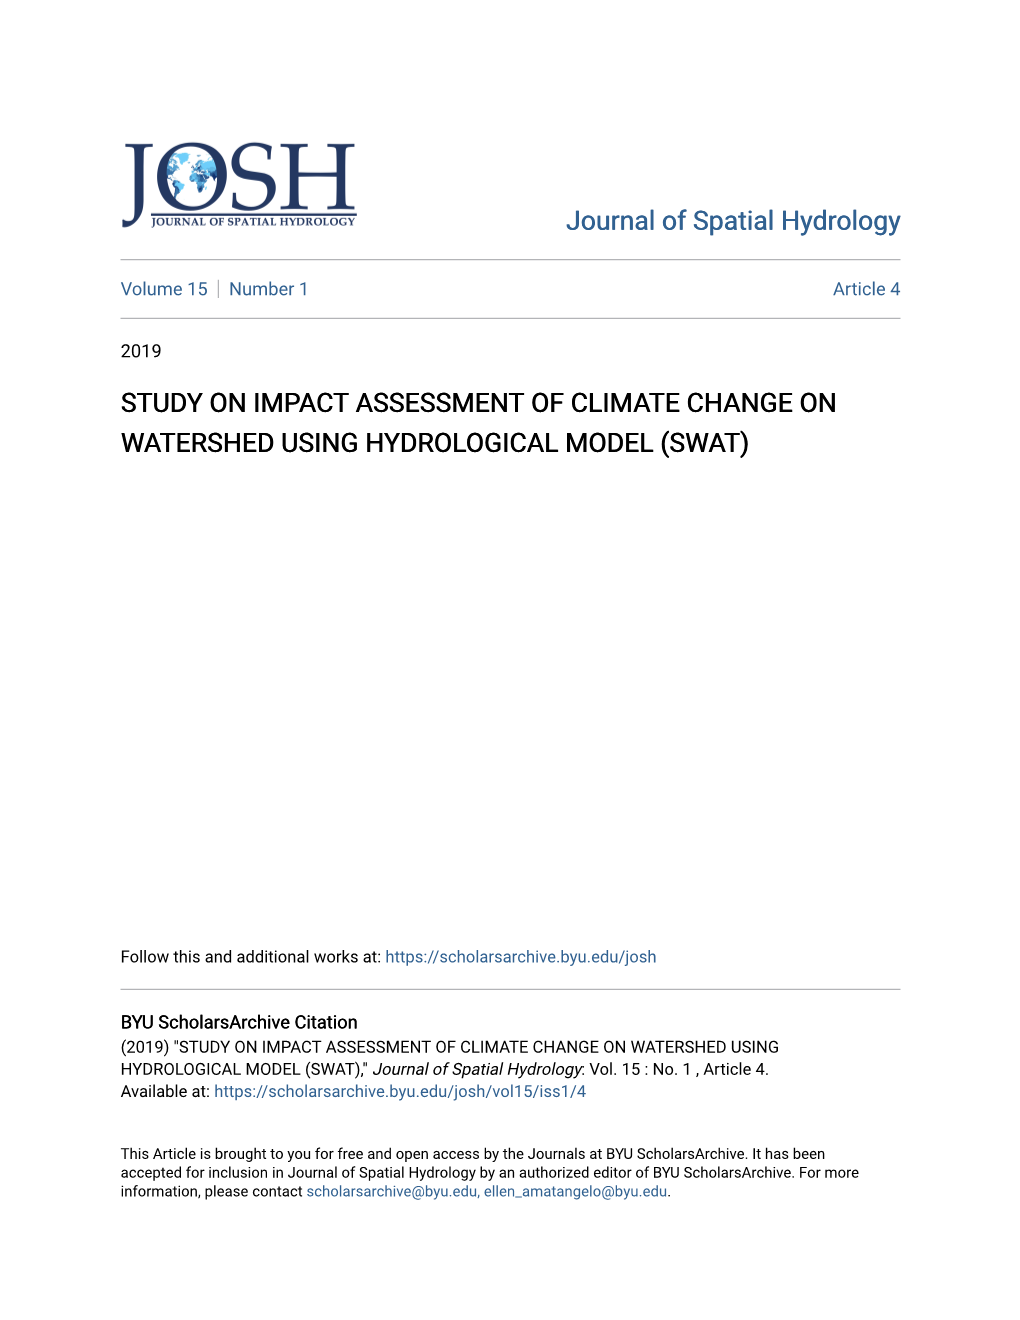 Study on Impact Assessment of Climate Change on Watershed Using Hydrological Model (Swat)